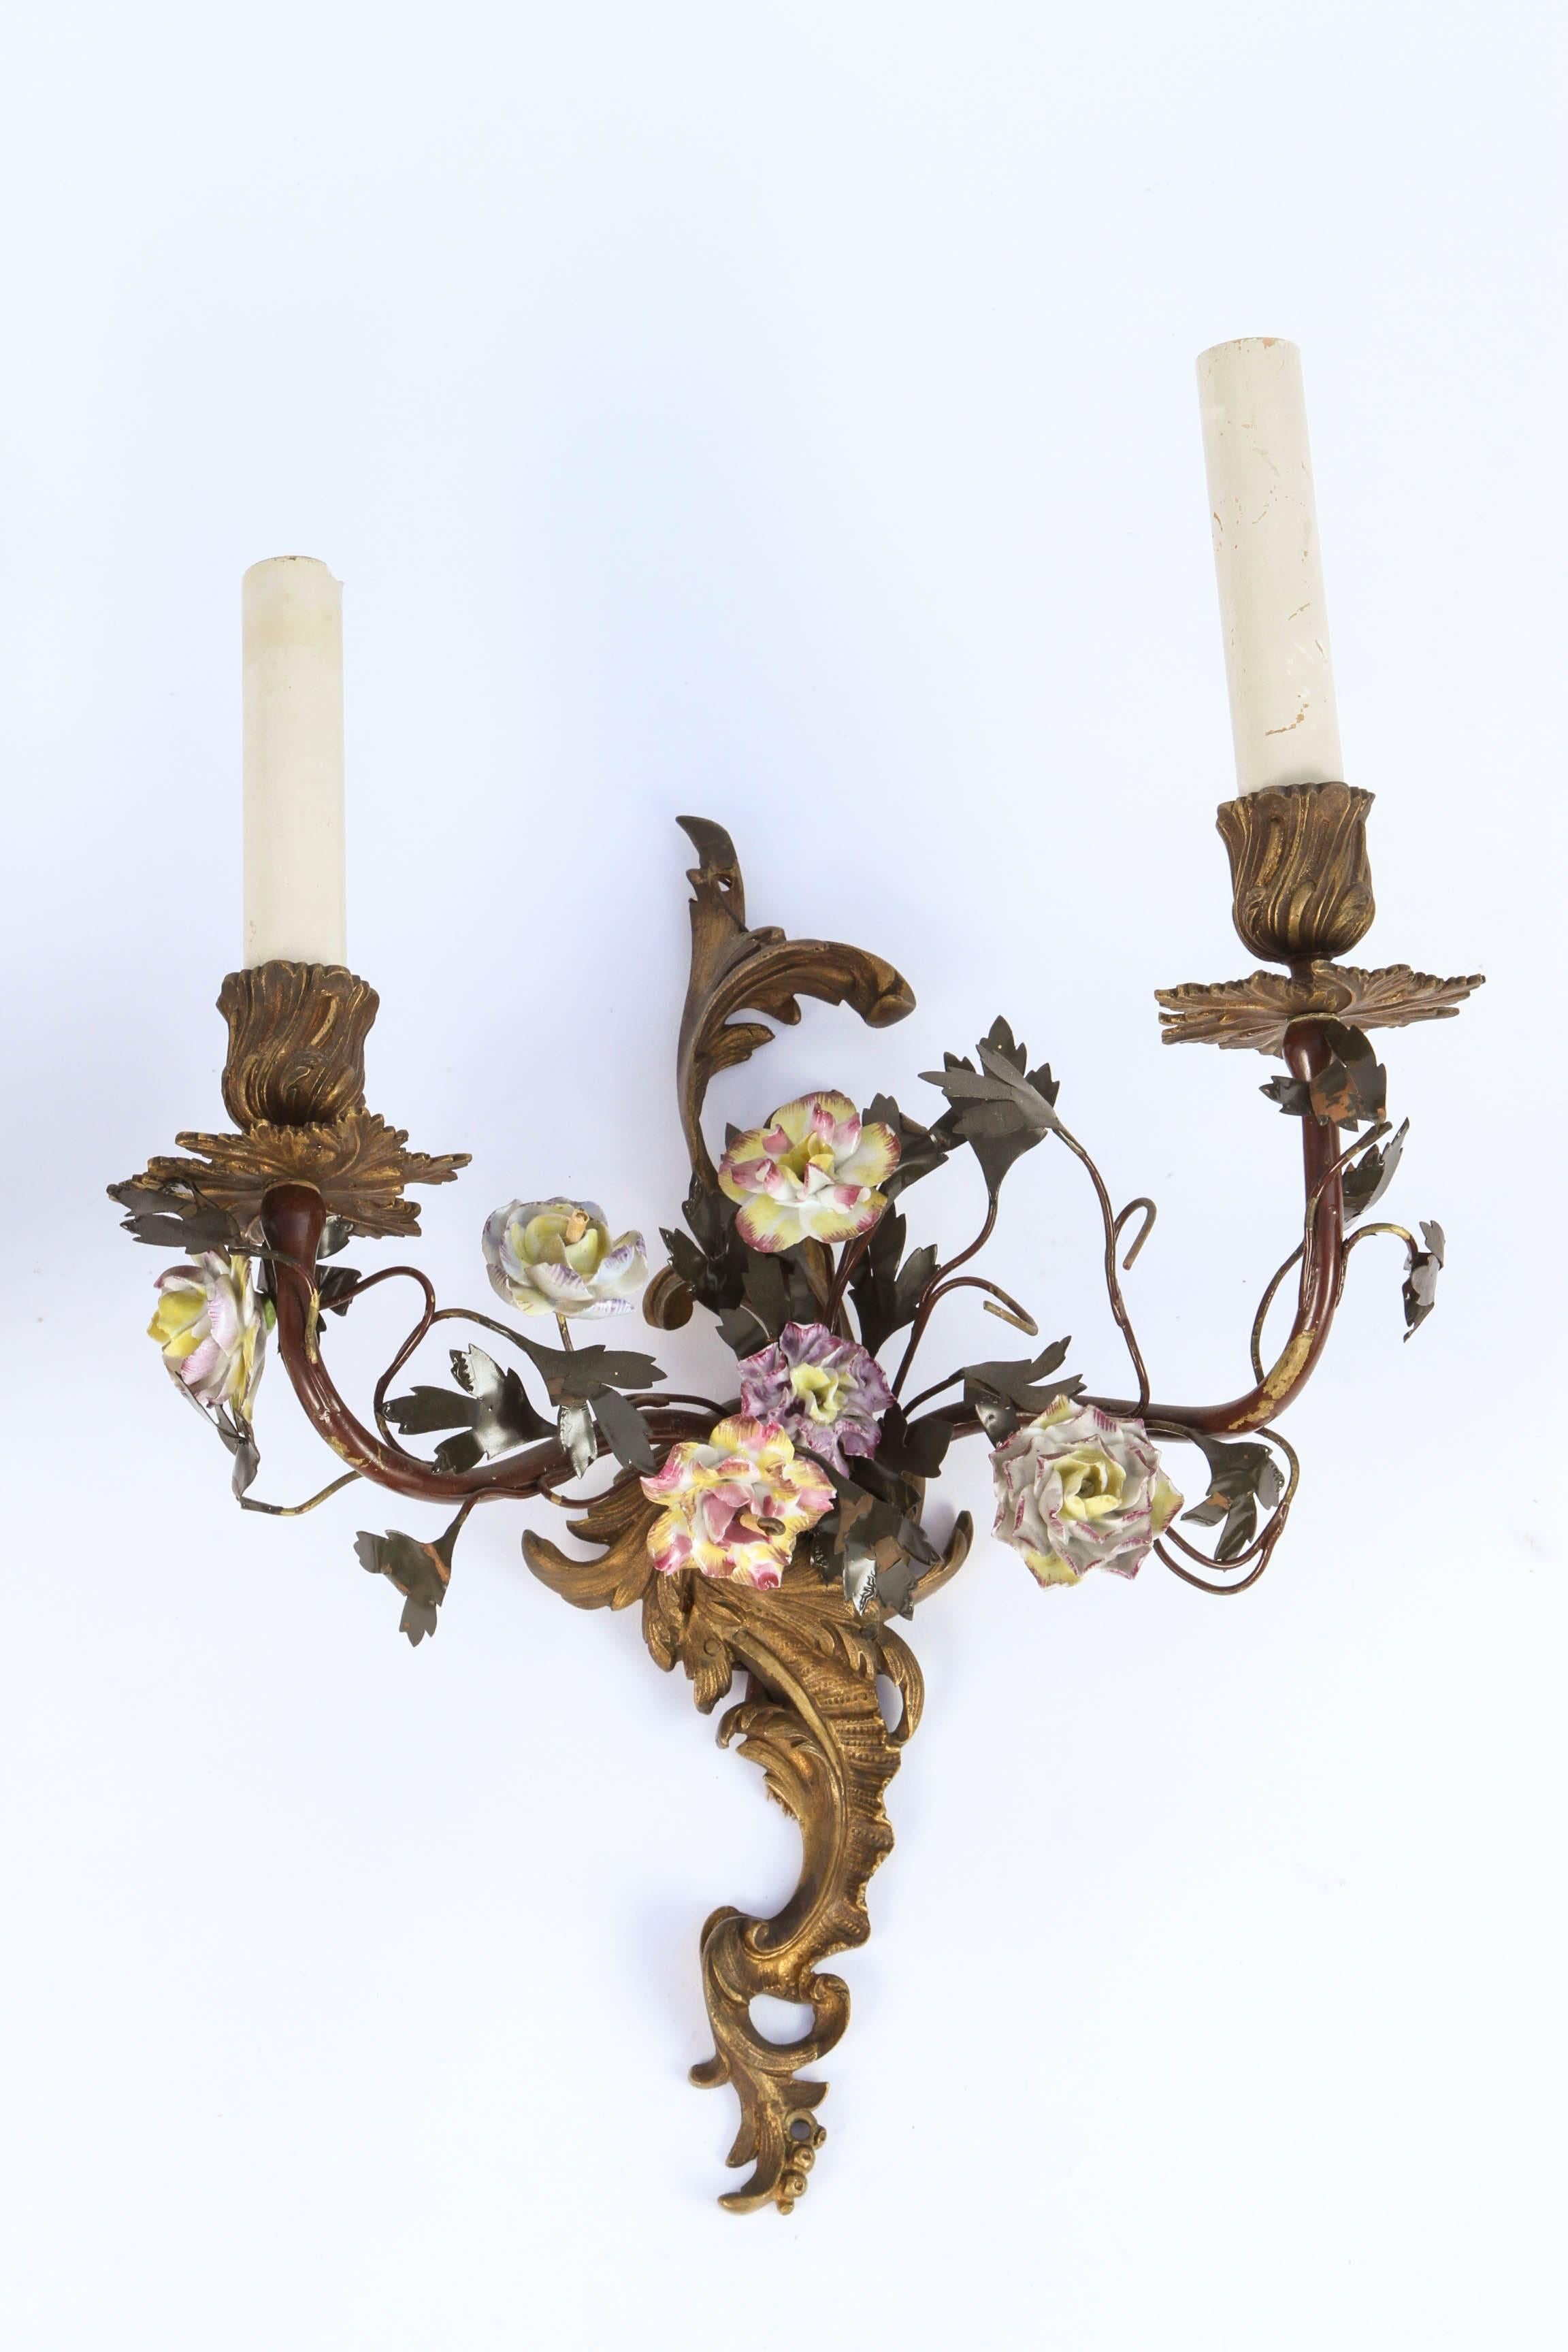 Pair of 1900s French bronze, toile and porcelain flower sconces. These sconces are sold as a pair and have been newly wired. The price below is for one pair but there is two pair available for separate purchase.